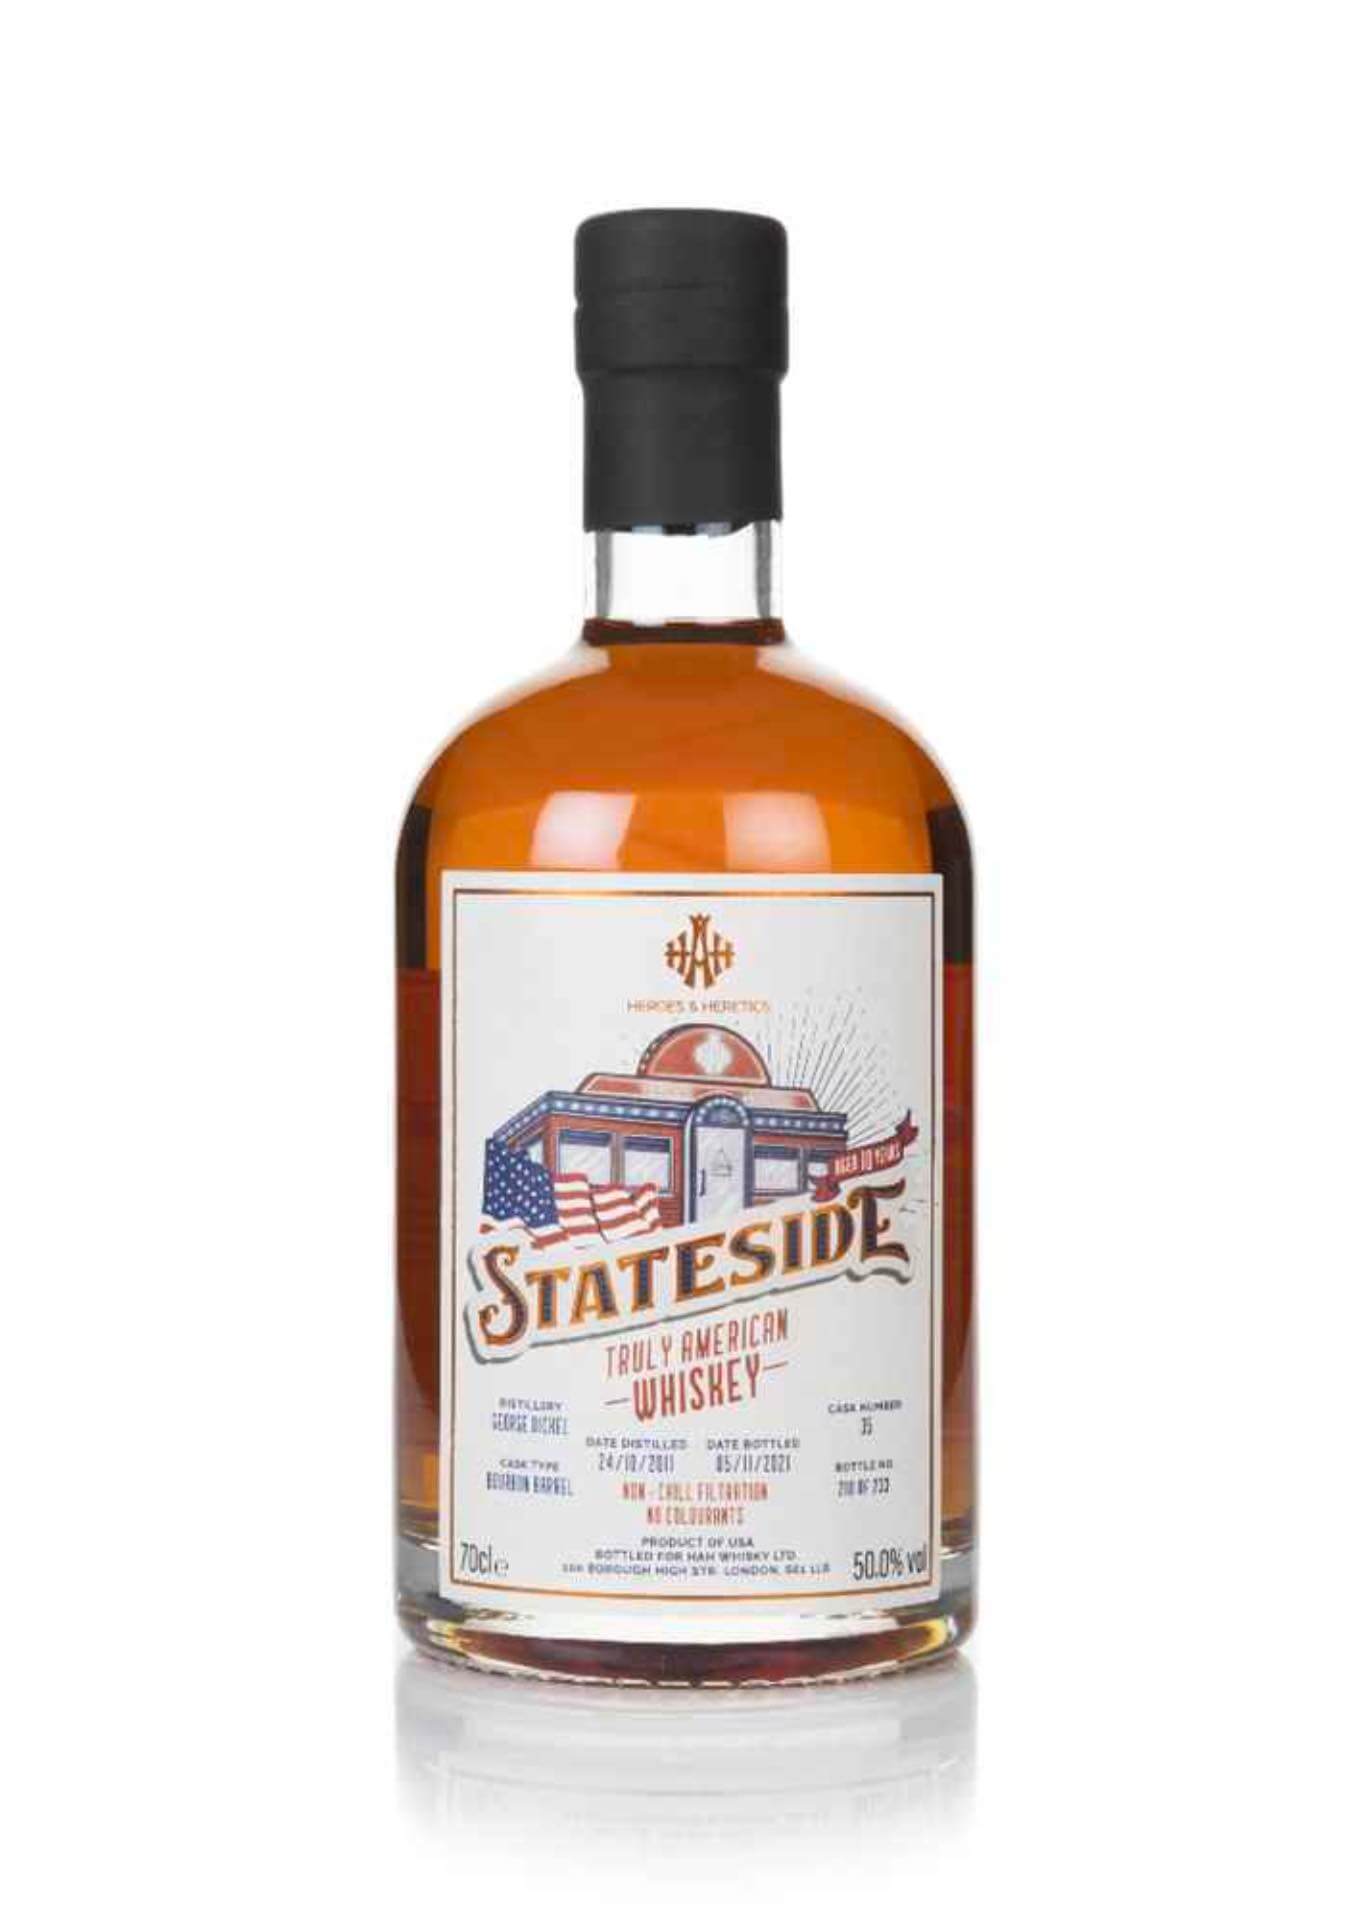 Heroes and Heretics, Stateside Bourbon, George Dickel 10 Year Old